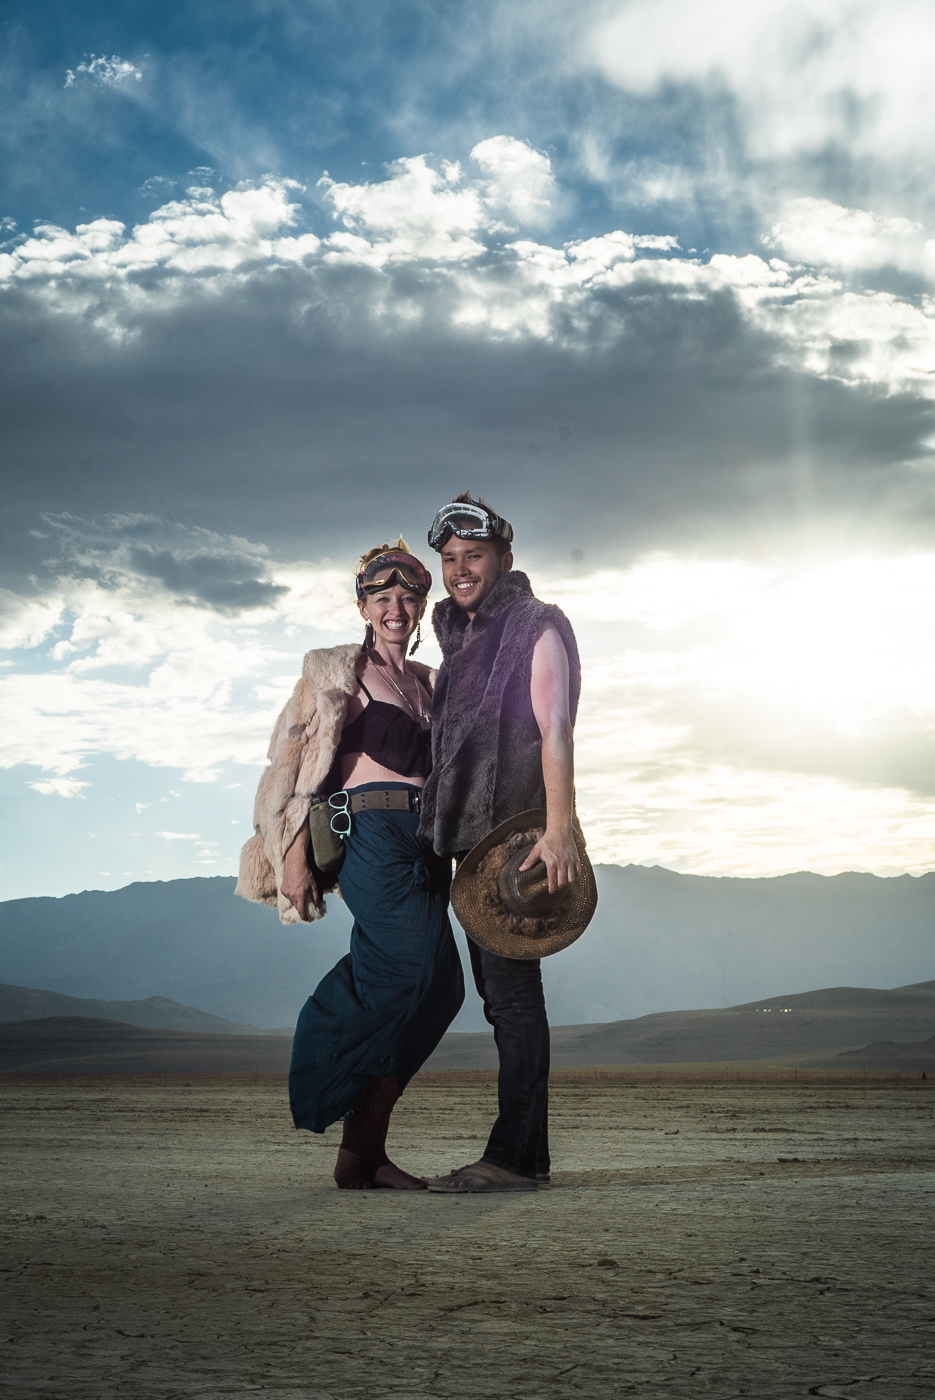 Burning Man 2014: Portraits of a Camp couples portraits on northtosouth.us